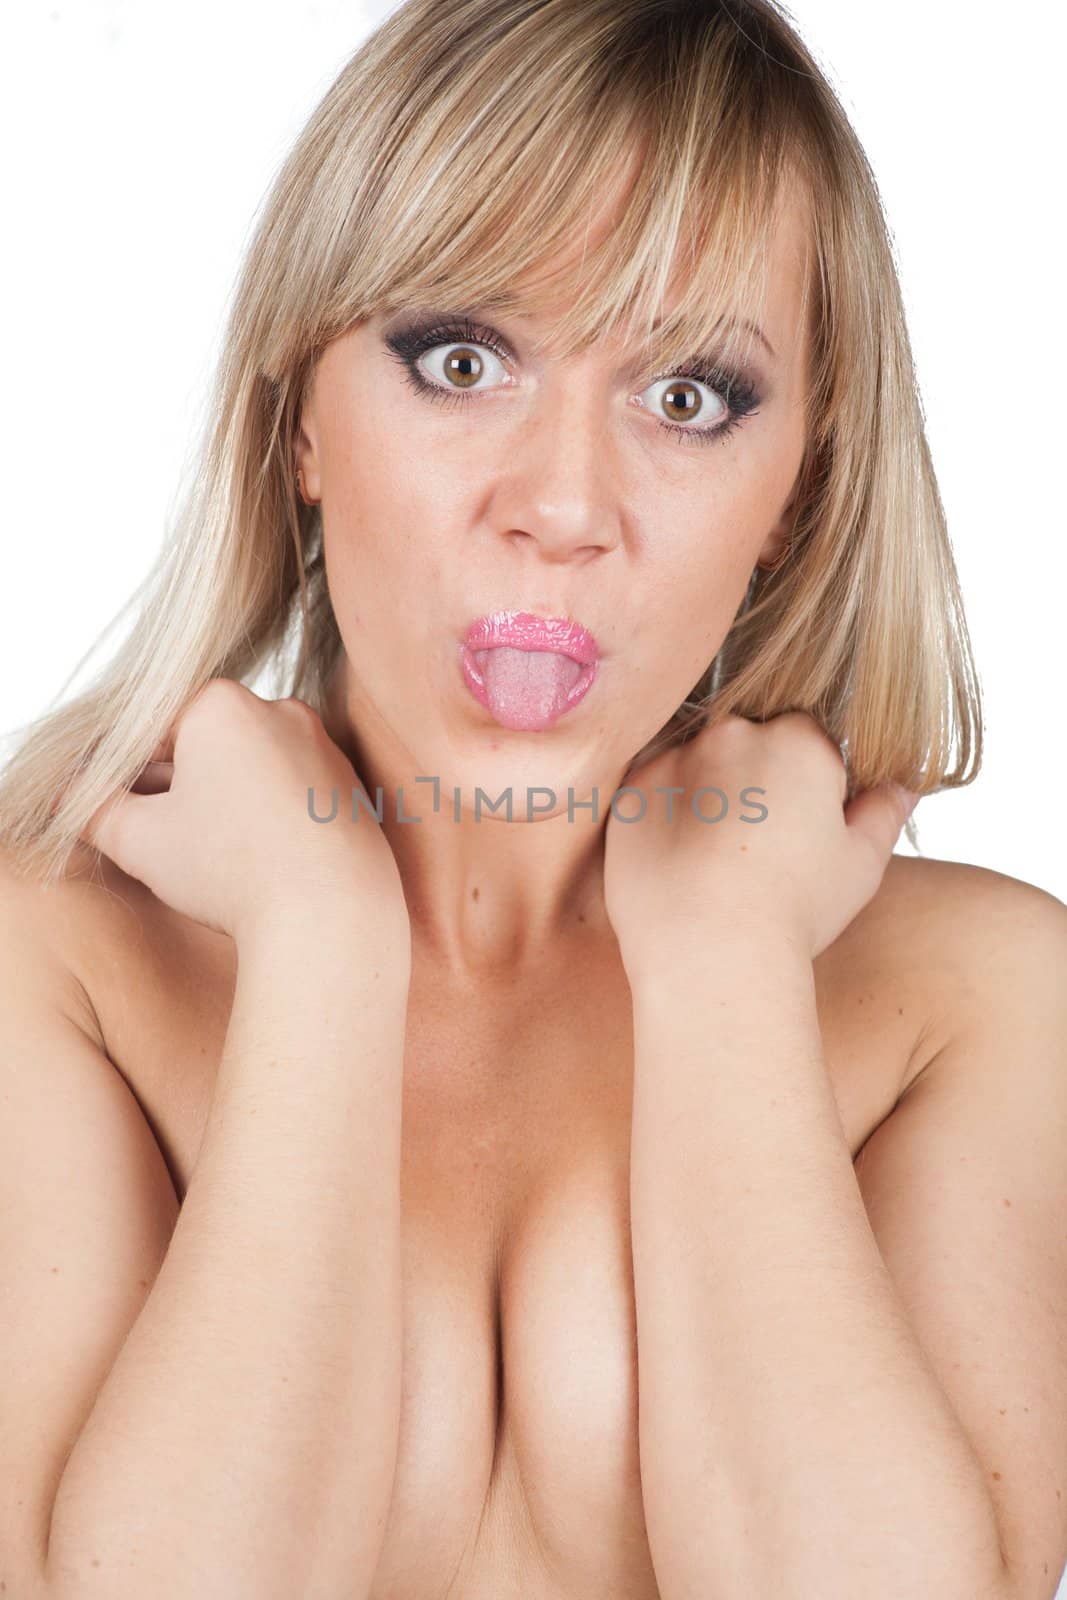 Woman making a funny face known isolated on white